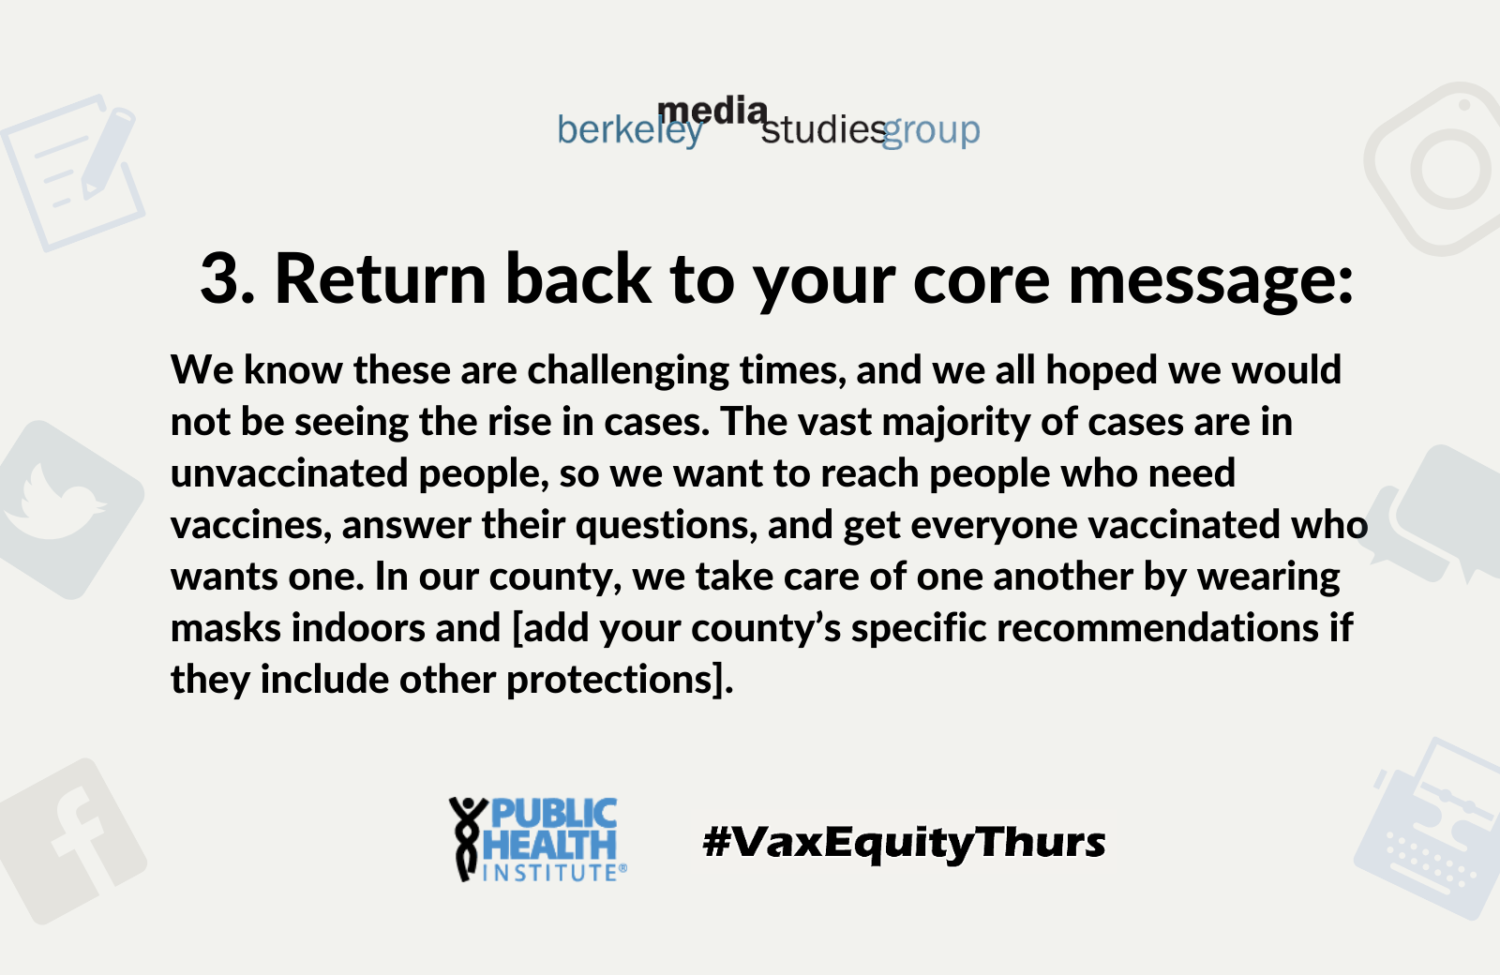 3. Return back to your core message: We know these are challenging times, and we all hoped we would not be seeing the rise in cases. The vast majority of cases are in unvaccinated people, so we want to reach people who need vaccines, answer their questions, and get everyone vaccinated who wants one. In our county, we take care of one another by wearing masks indoors and [add your county’s specific recommendations if they include other protections].